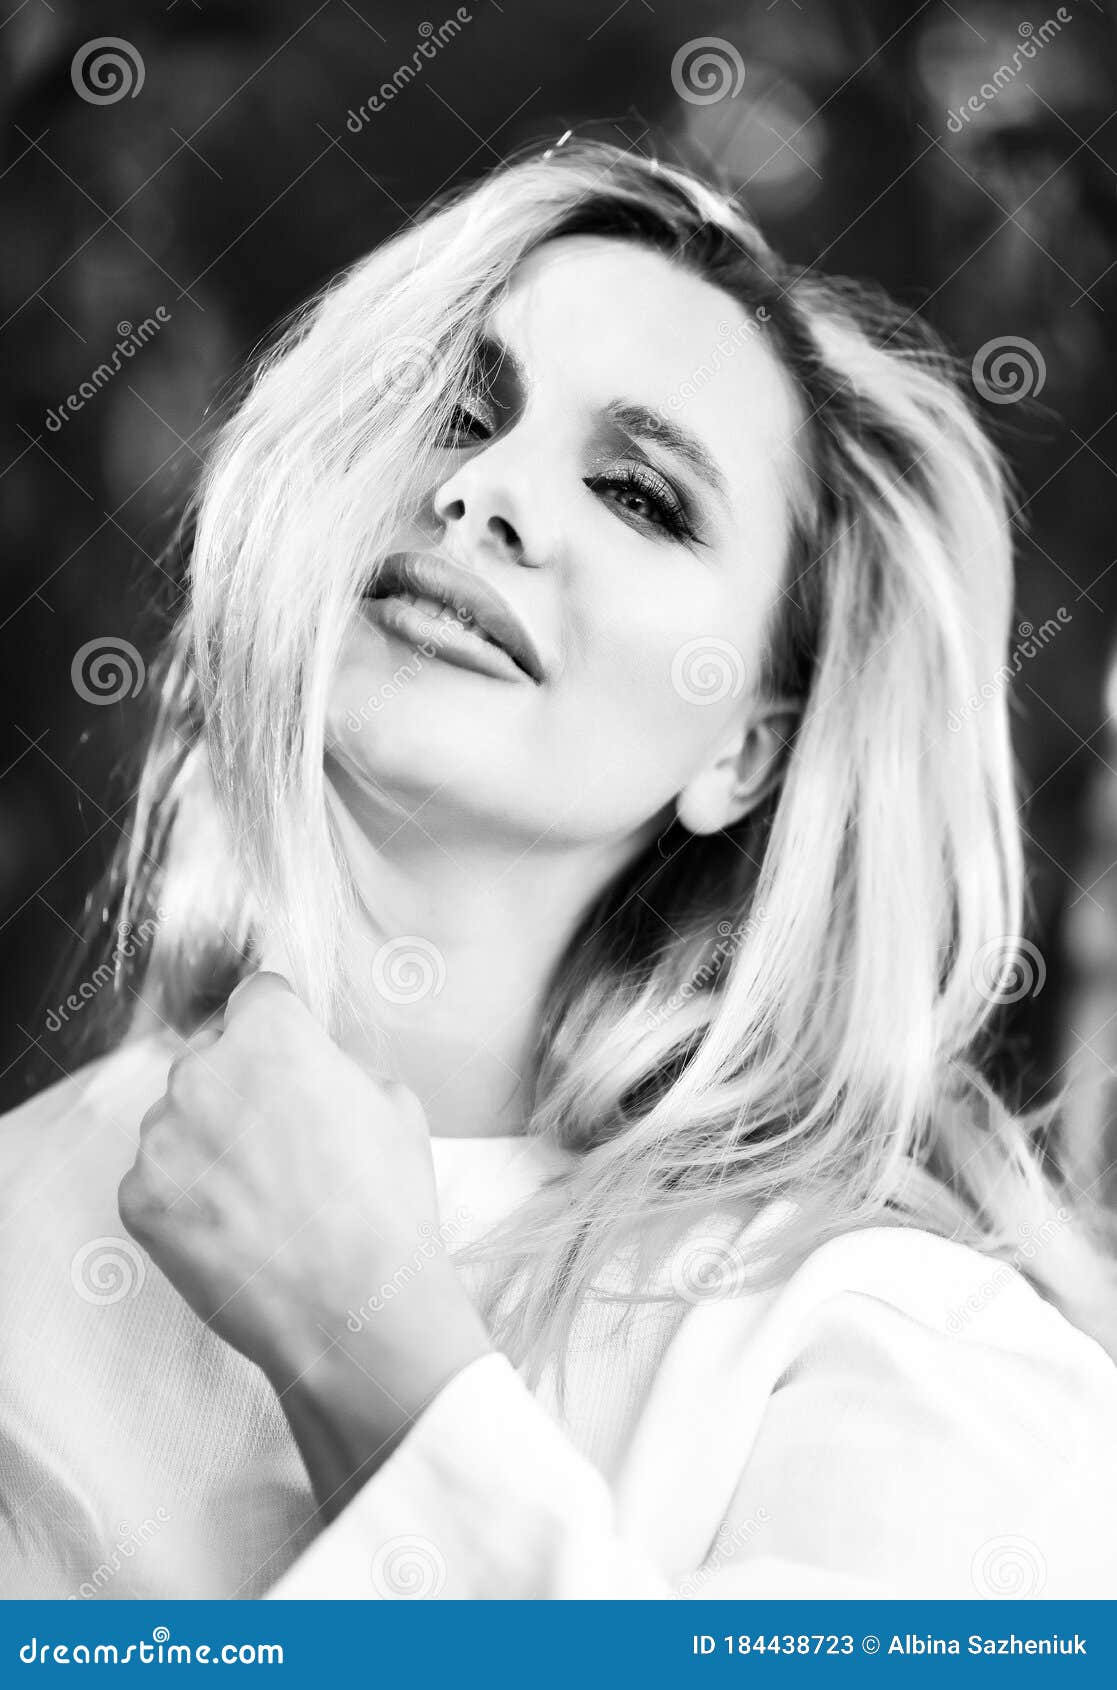 Close-up Black and White Vertical Portrait of Beautiful Blonde Sexual 30 Years Old Woman with Make-up, Wild Hair and Hand Near Stock Image image